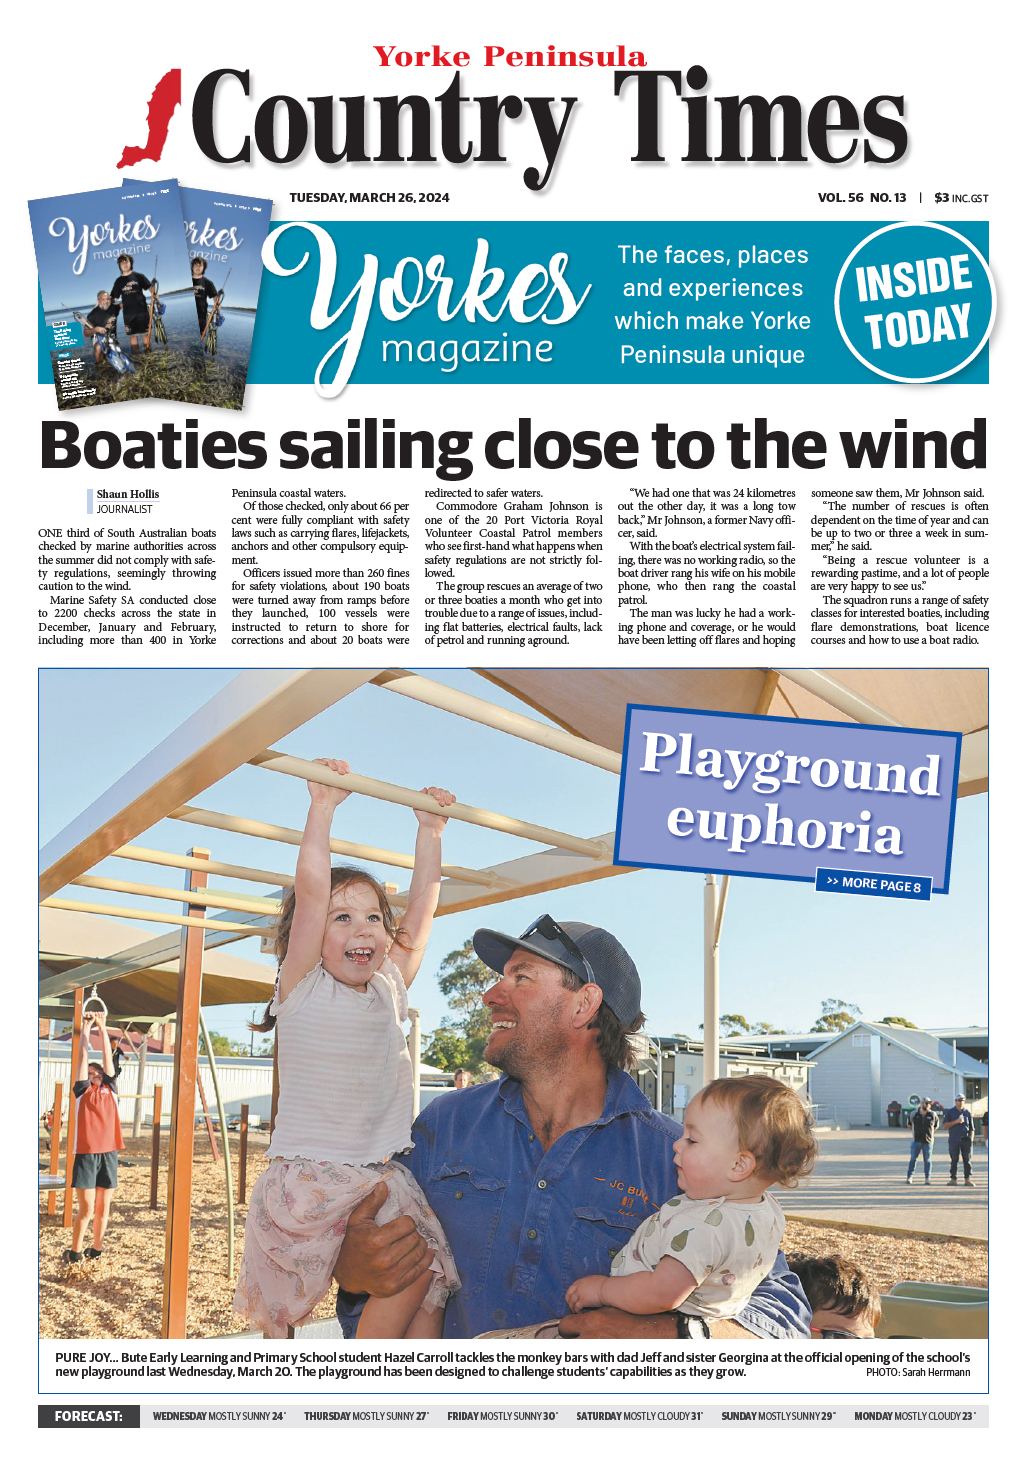 Yorke Peninsula Country Times 26 March 2024